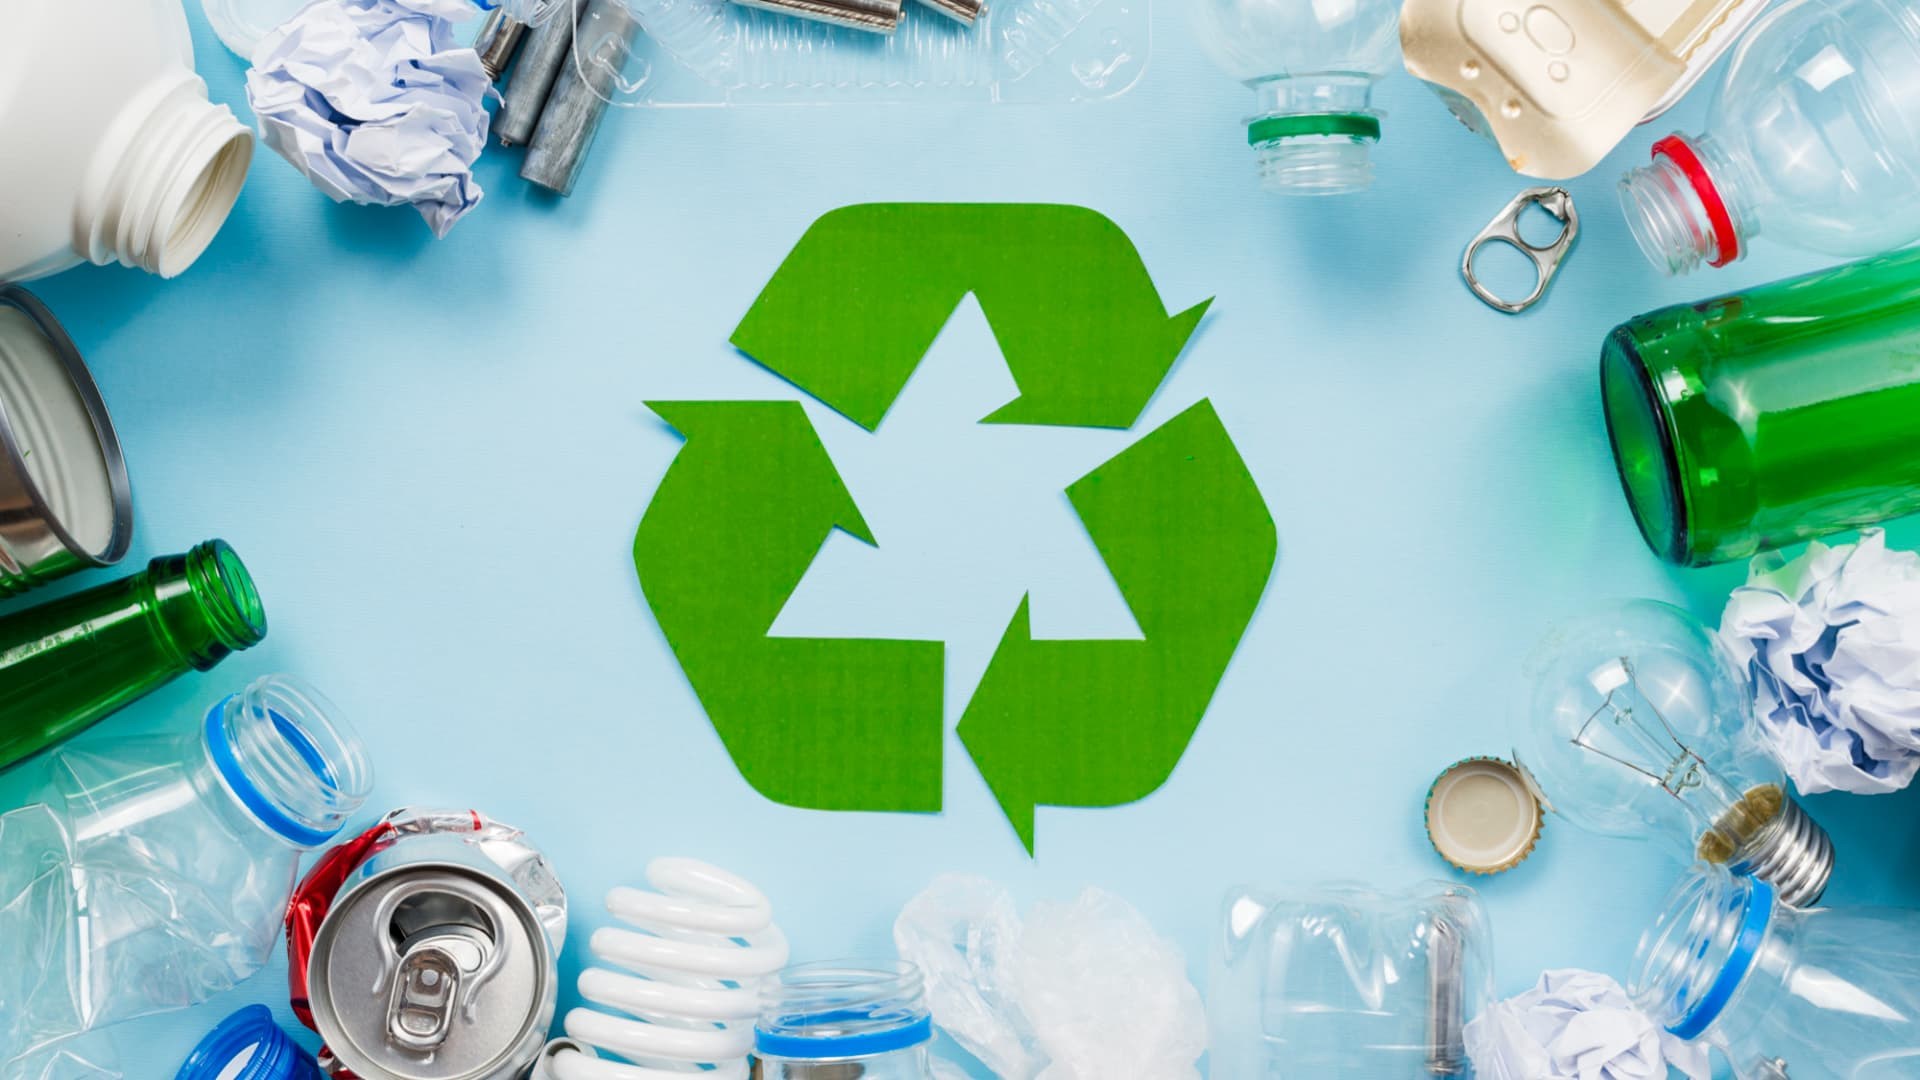 11-astounding-facts-about-waste-management-and-recycling